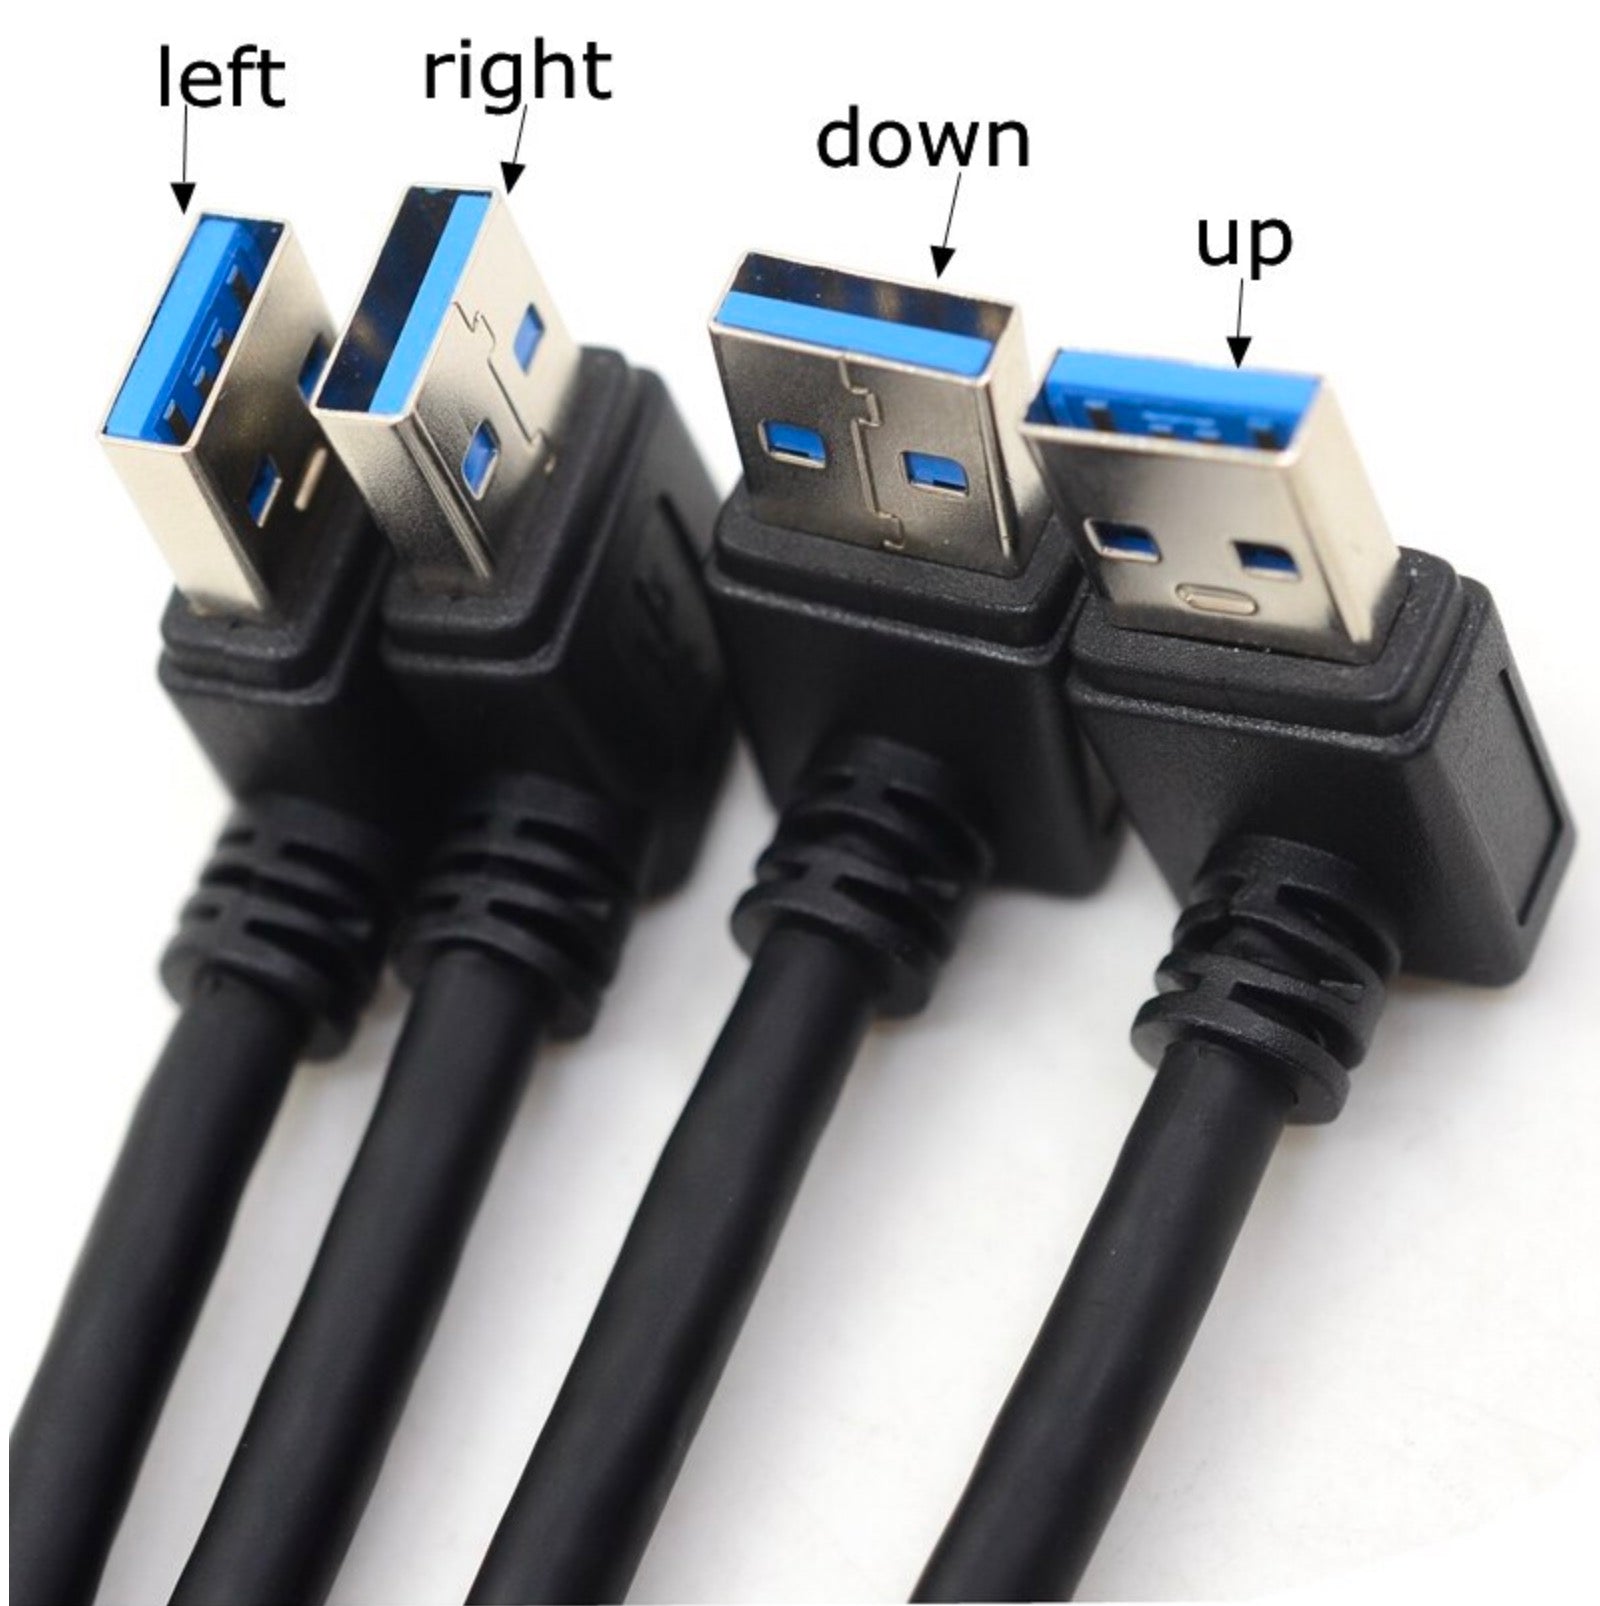 USB-A 3.0 Male to Female M3 Panel Mount Extension Cable 0.3m